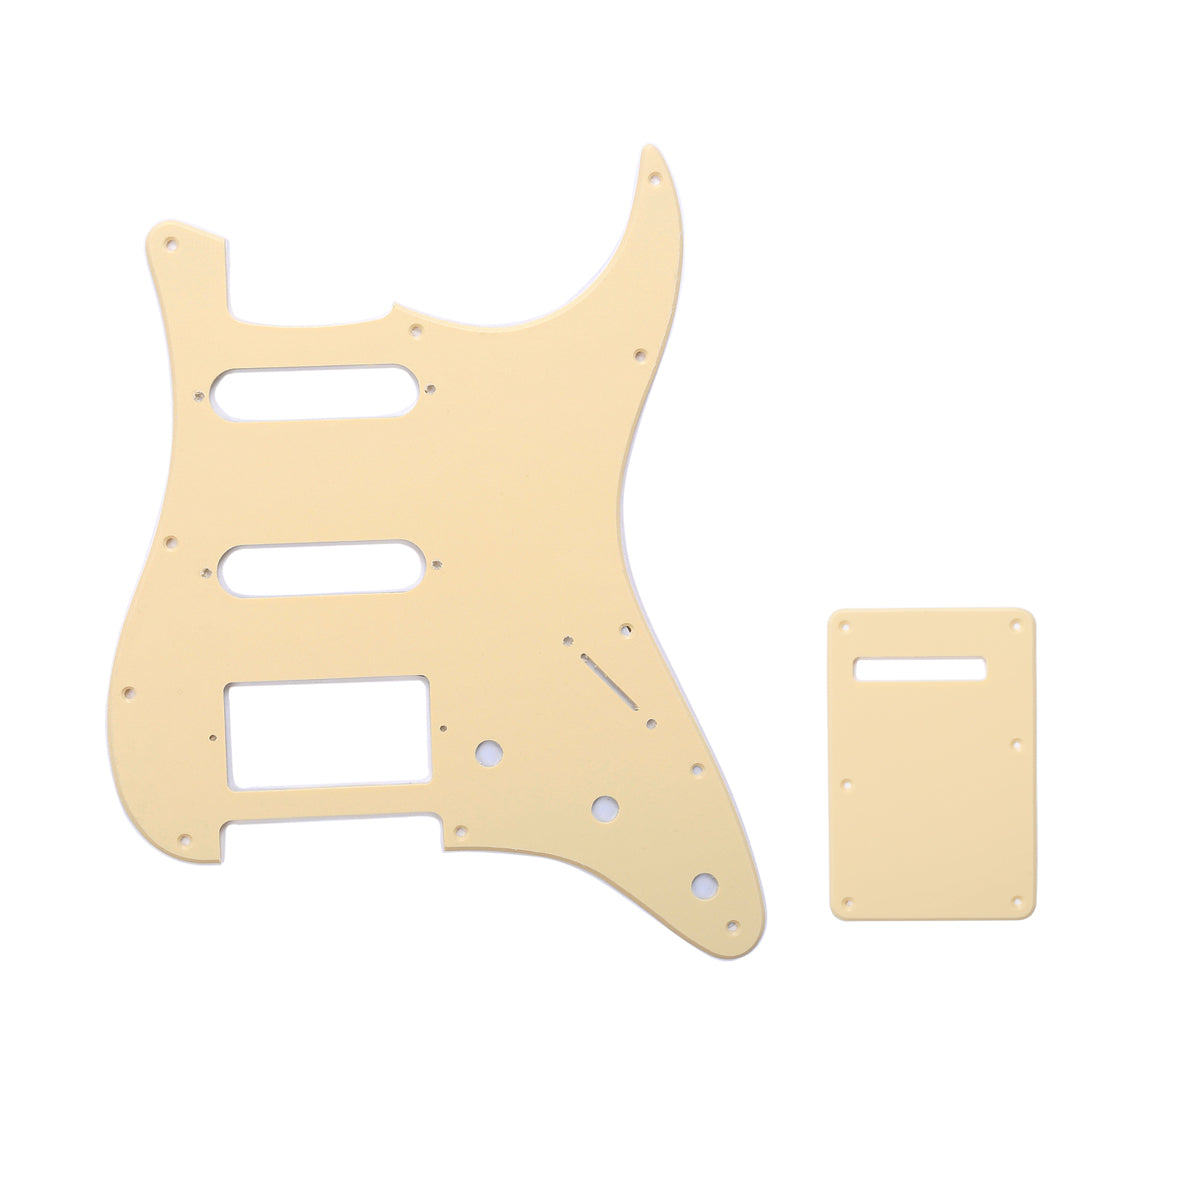 Musiclily SSH 11 Hole Strat Guitar Pickguard and BackPlate Set for Fender USA/Mexican Standard Stratocaster Modern Style, 1Ply Cream